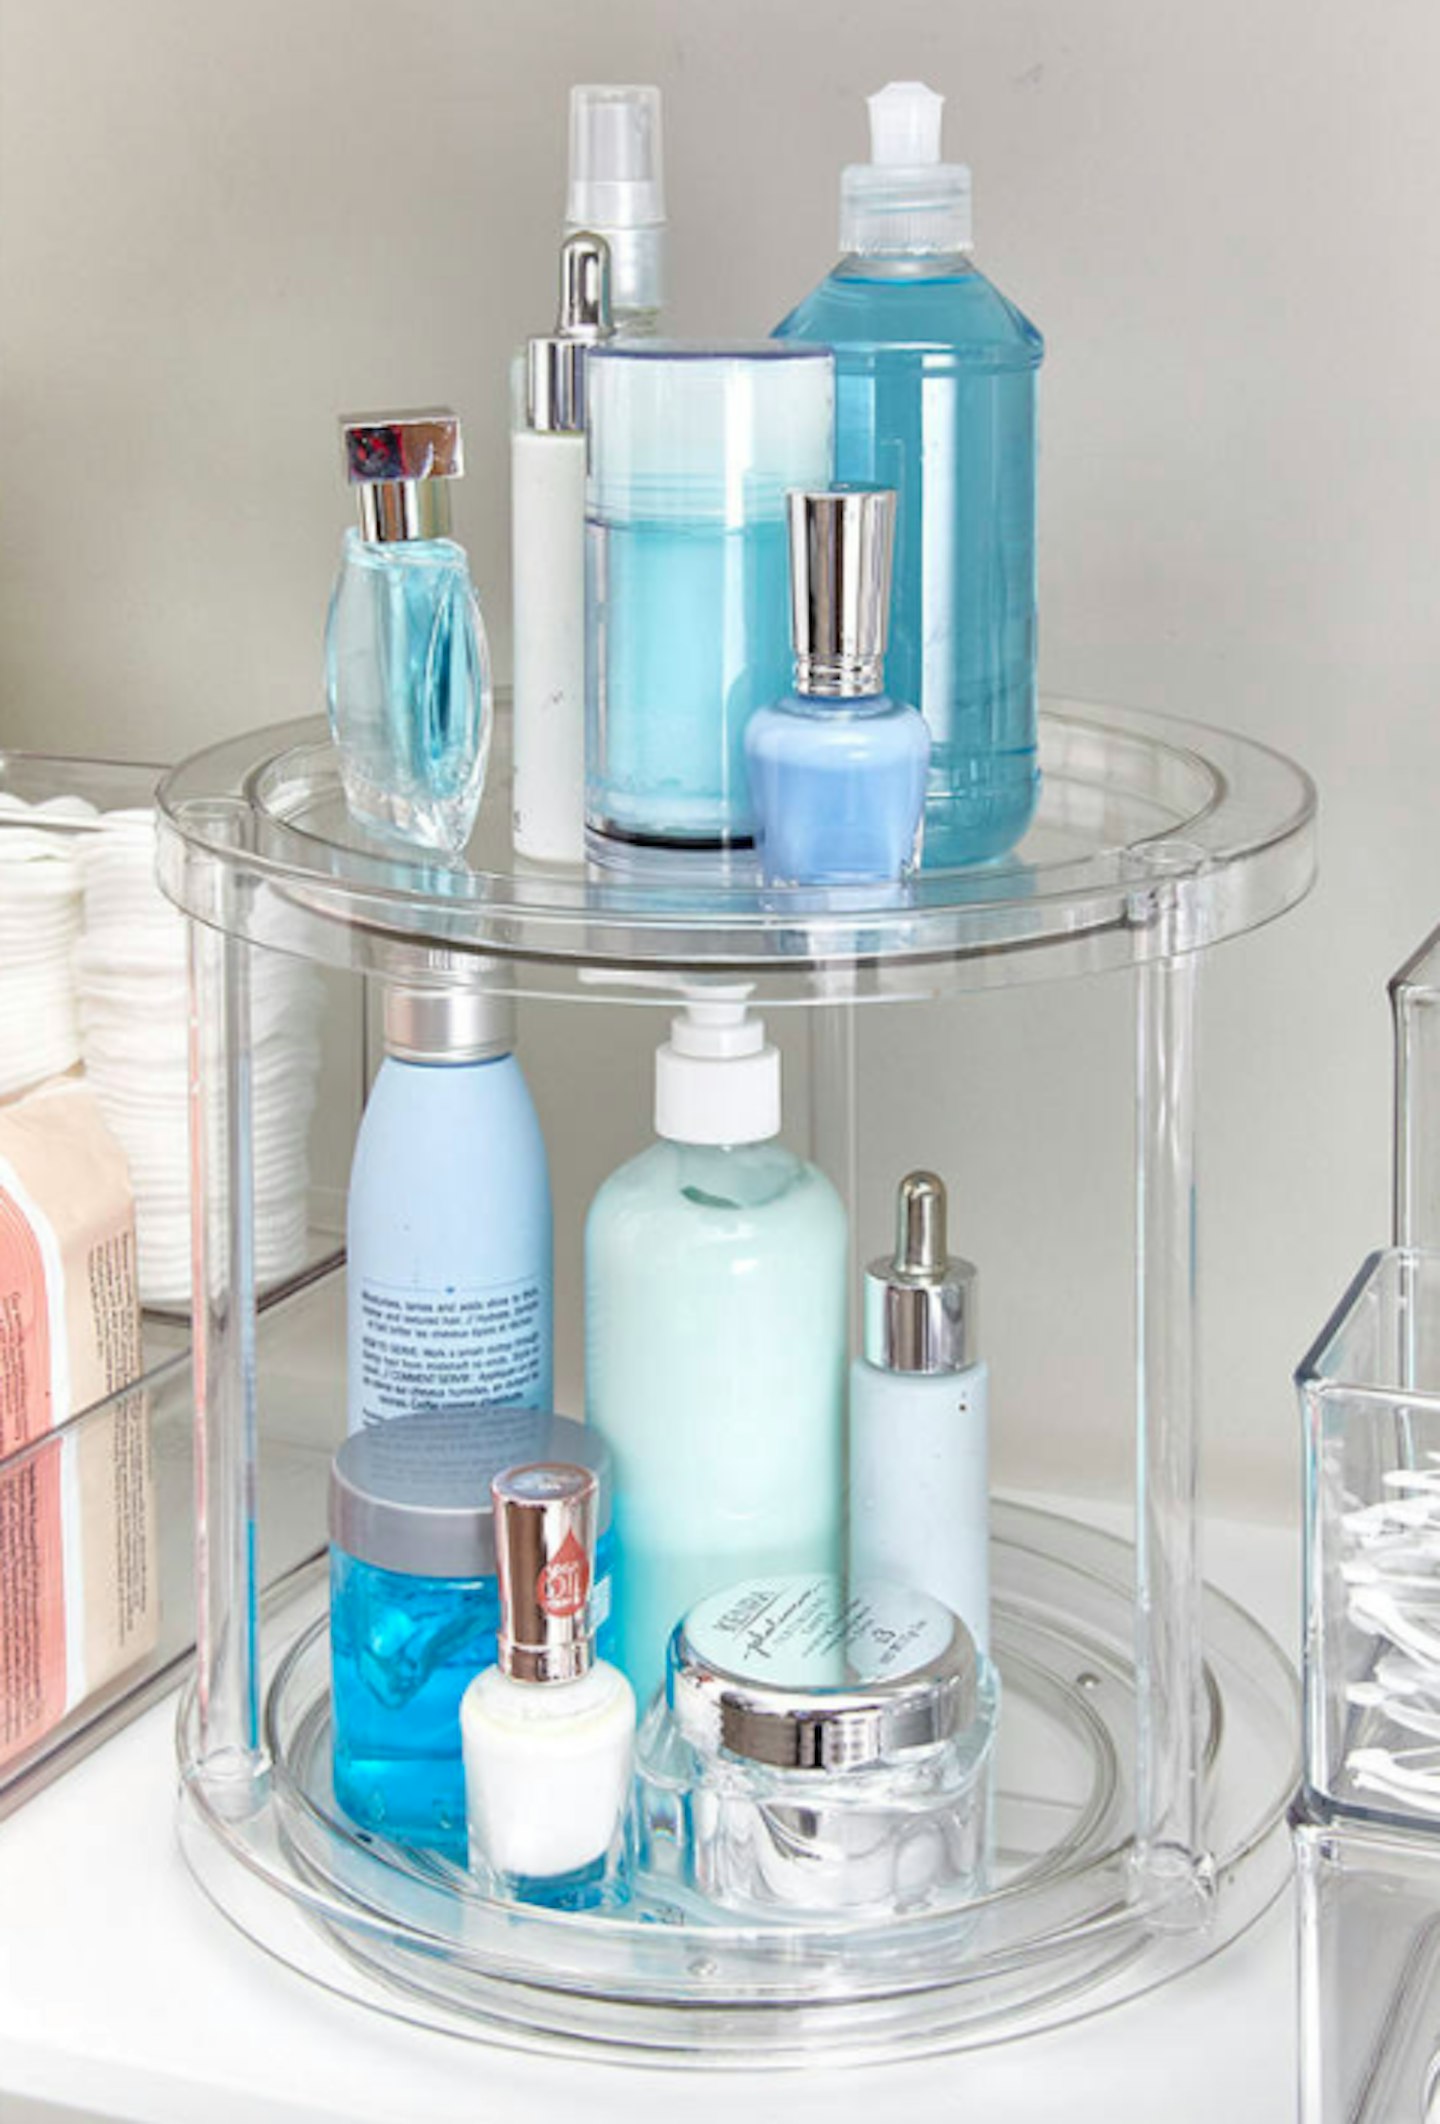 You Can Buy The Home Edit Clear Storage Box Range At John Lewis Now